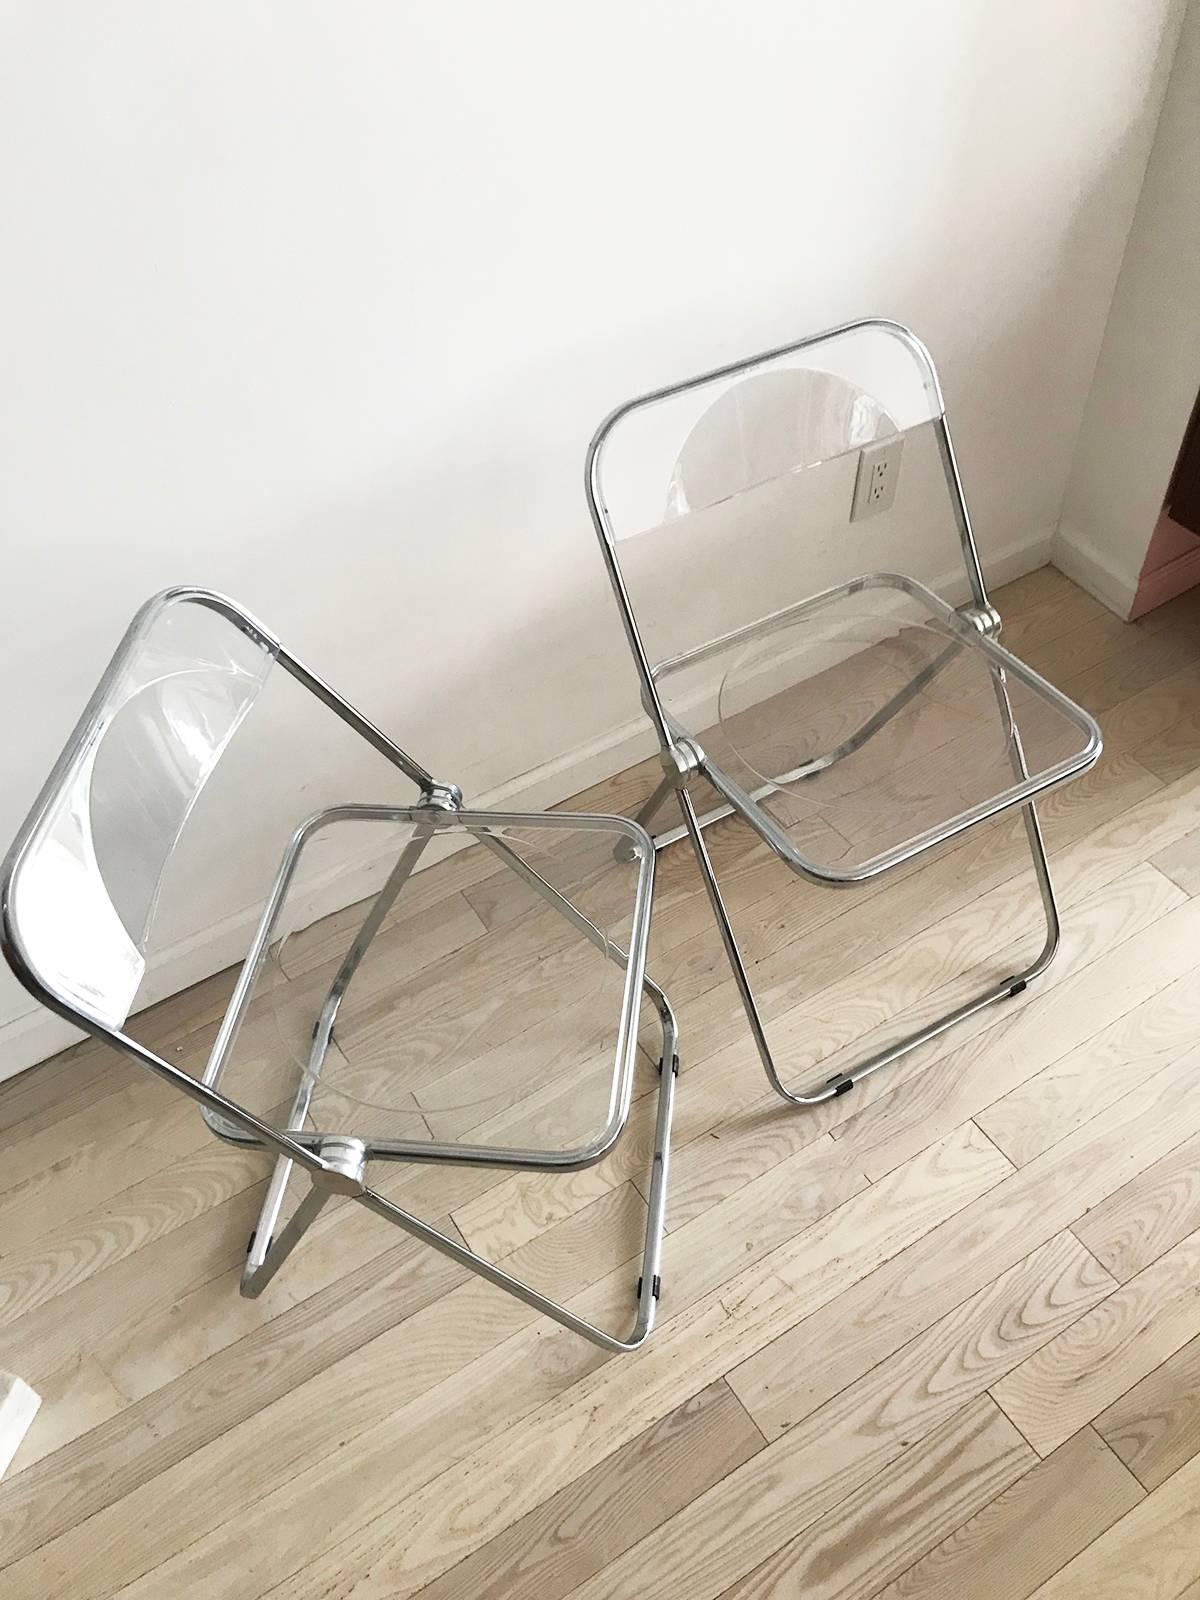 Awesome 1960s Lucite and chrome folding chairs. In amazing condition. Made in Italy. Giancarlo Piretti for Anonima Castelli. Sold as a pair of two chairs.